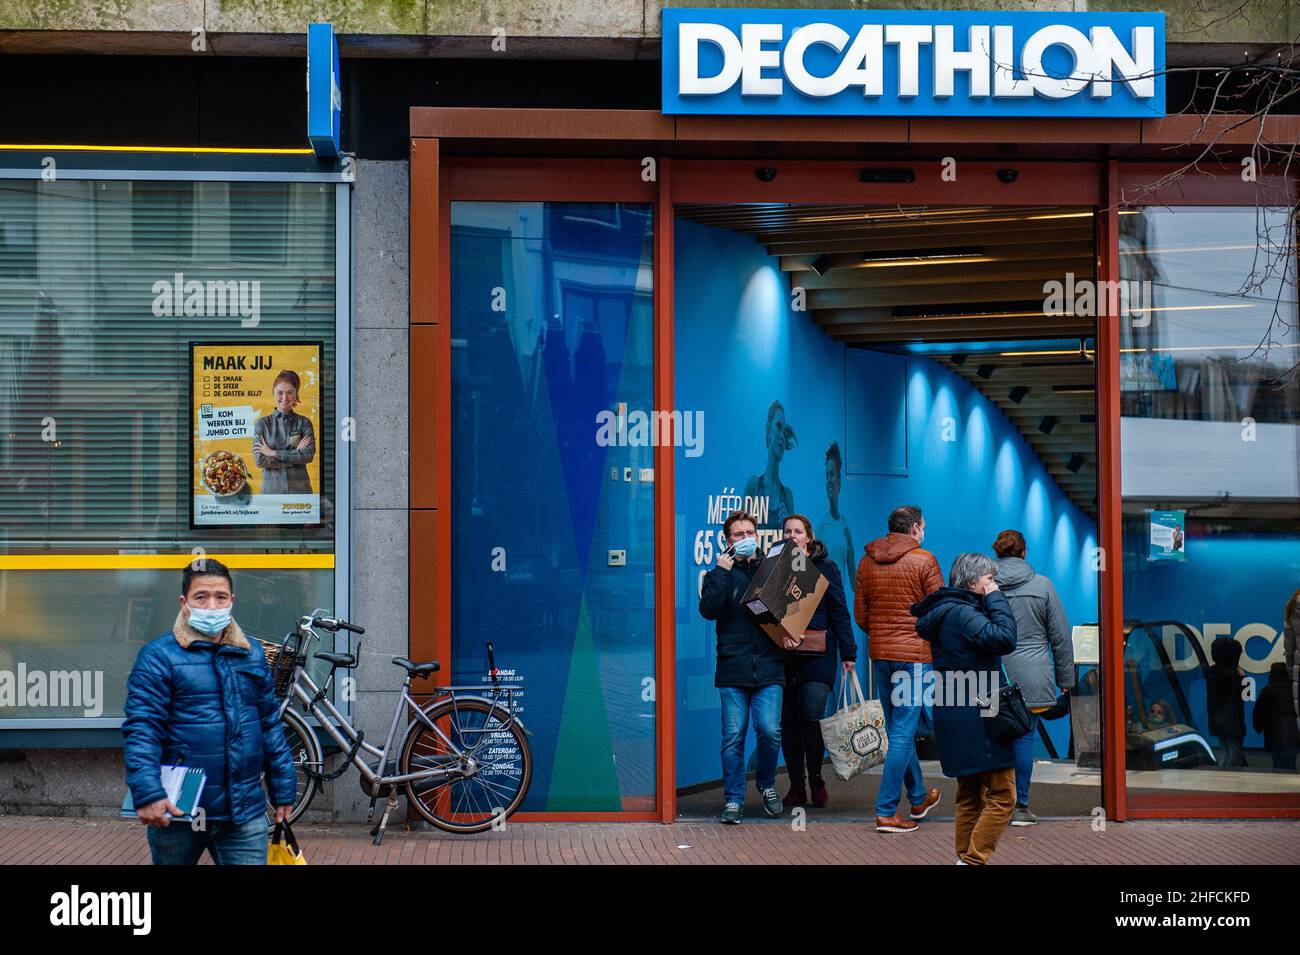 Decathlon To Close Its Last Two U.S. Stores